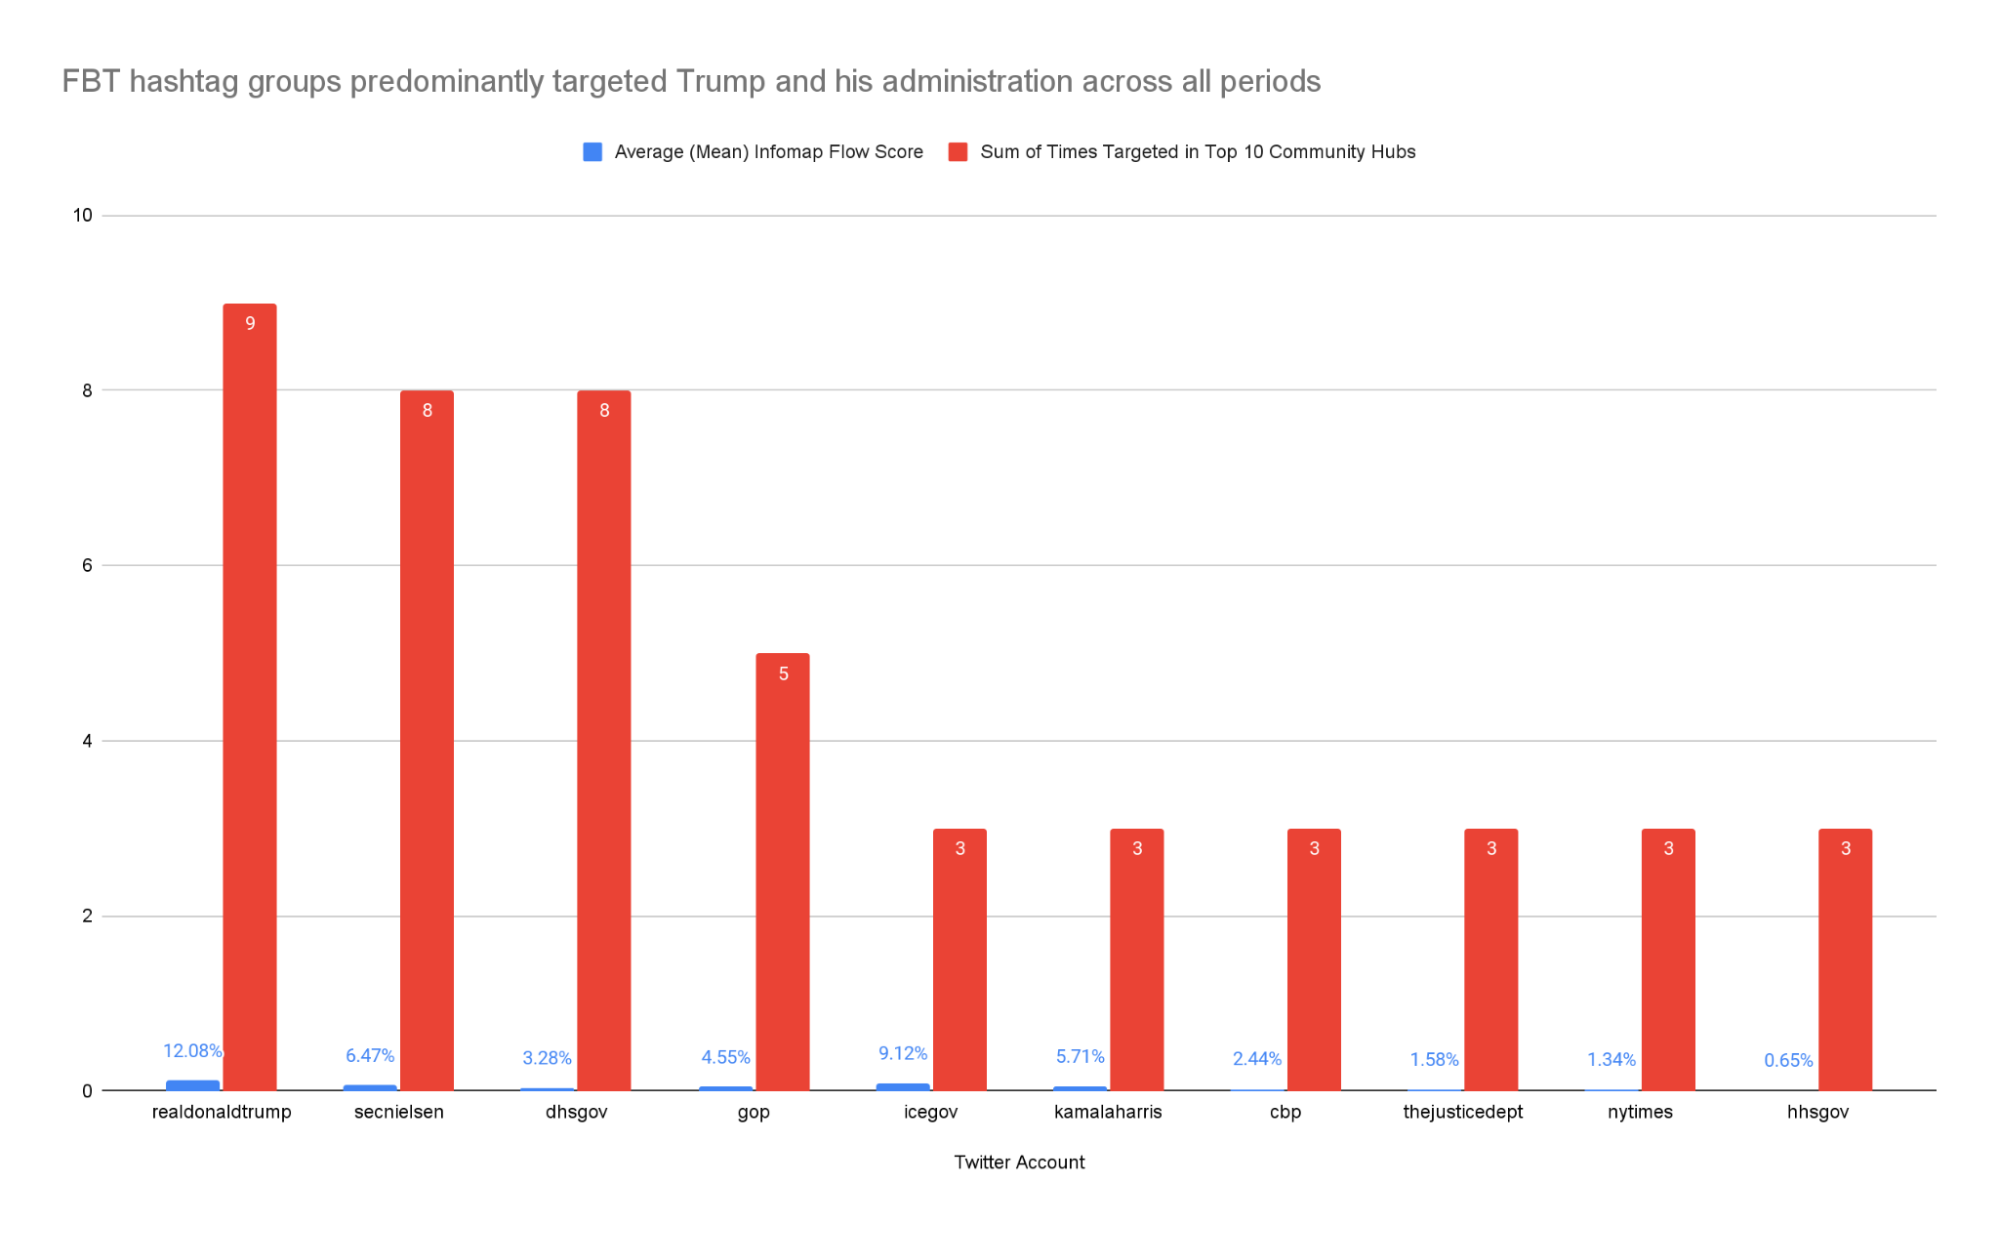 Figure 4. Average (mean) infomap flow score across all periods put into comparison with the sum of times the accounts were targeted across all periods within the top 10 FBT community hubs. FBT HTGs predominately targeted Trump and his administration across all periods.